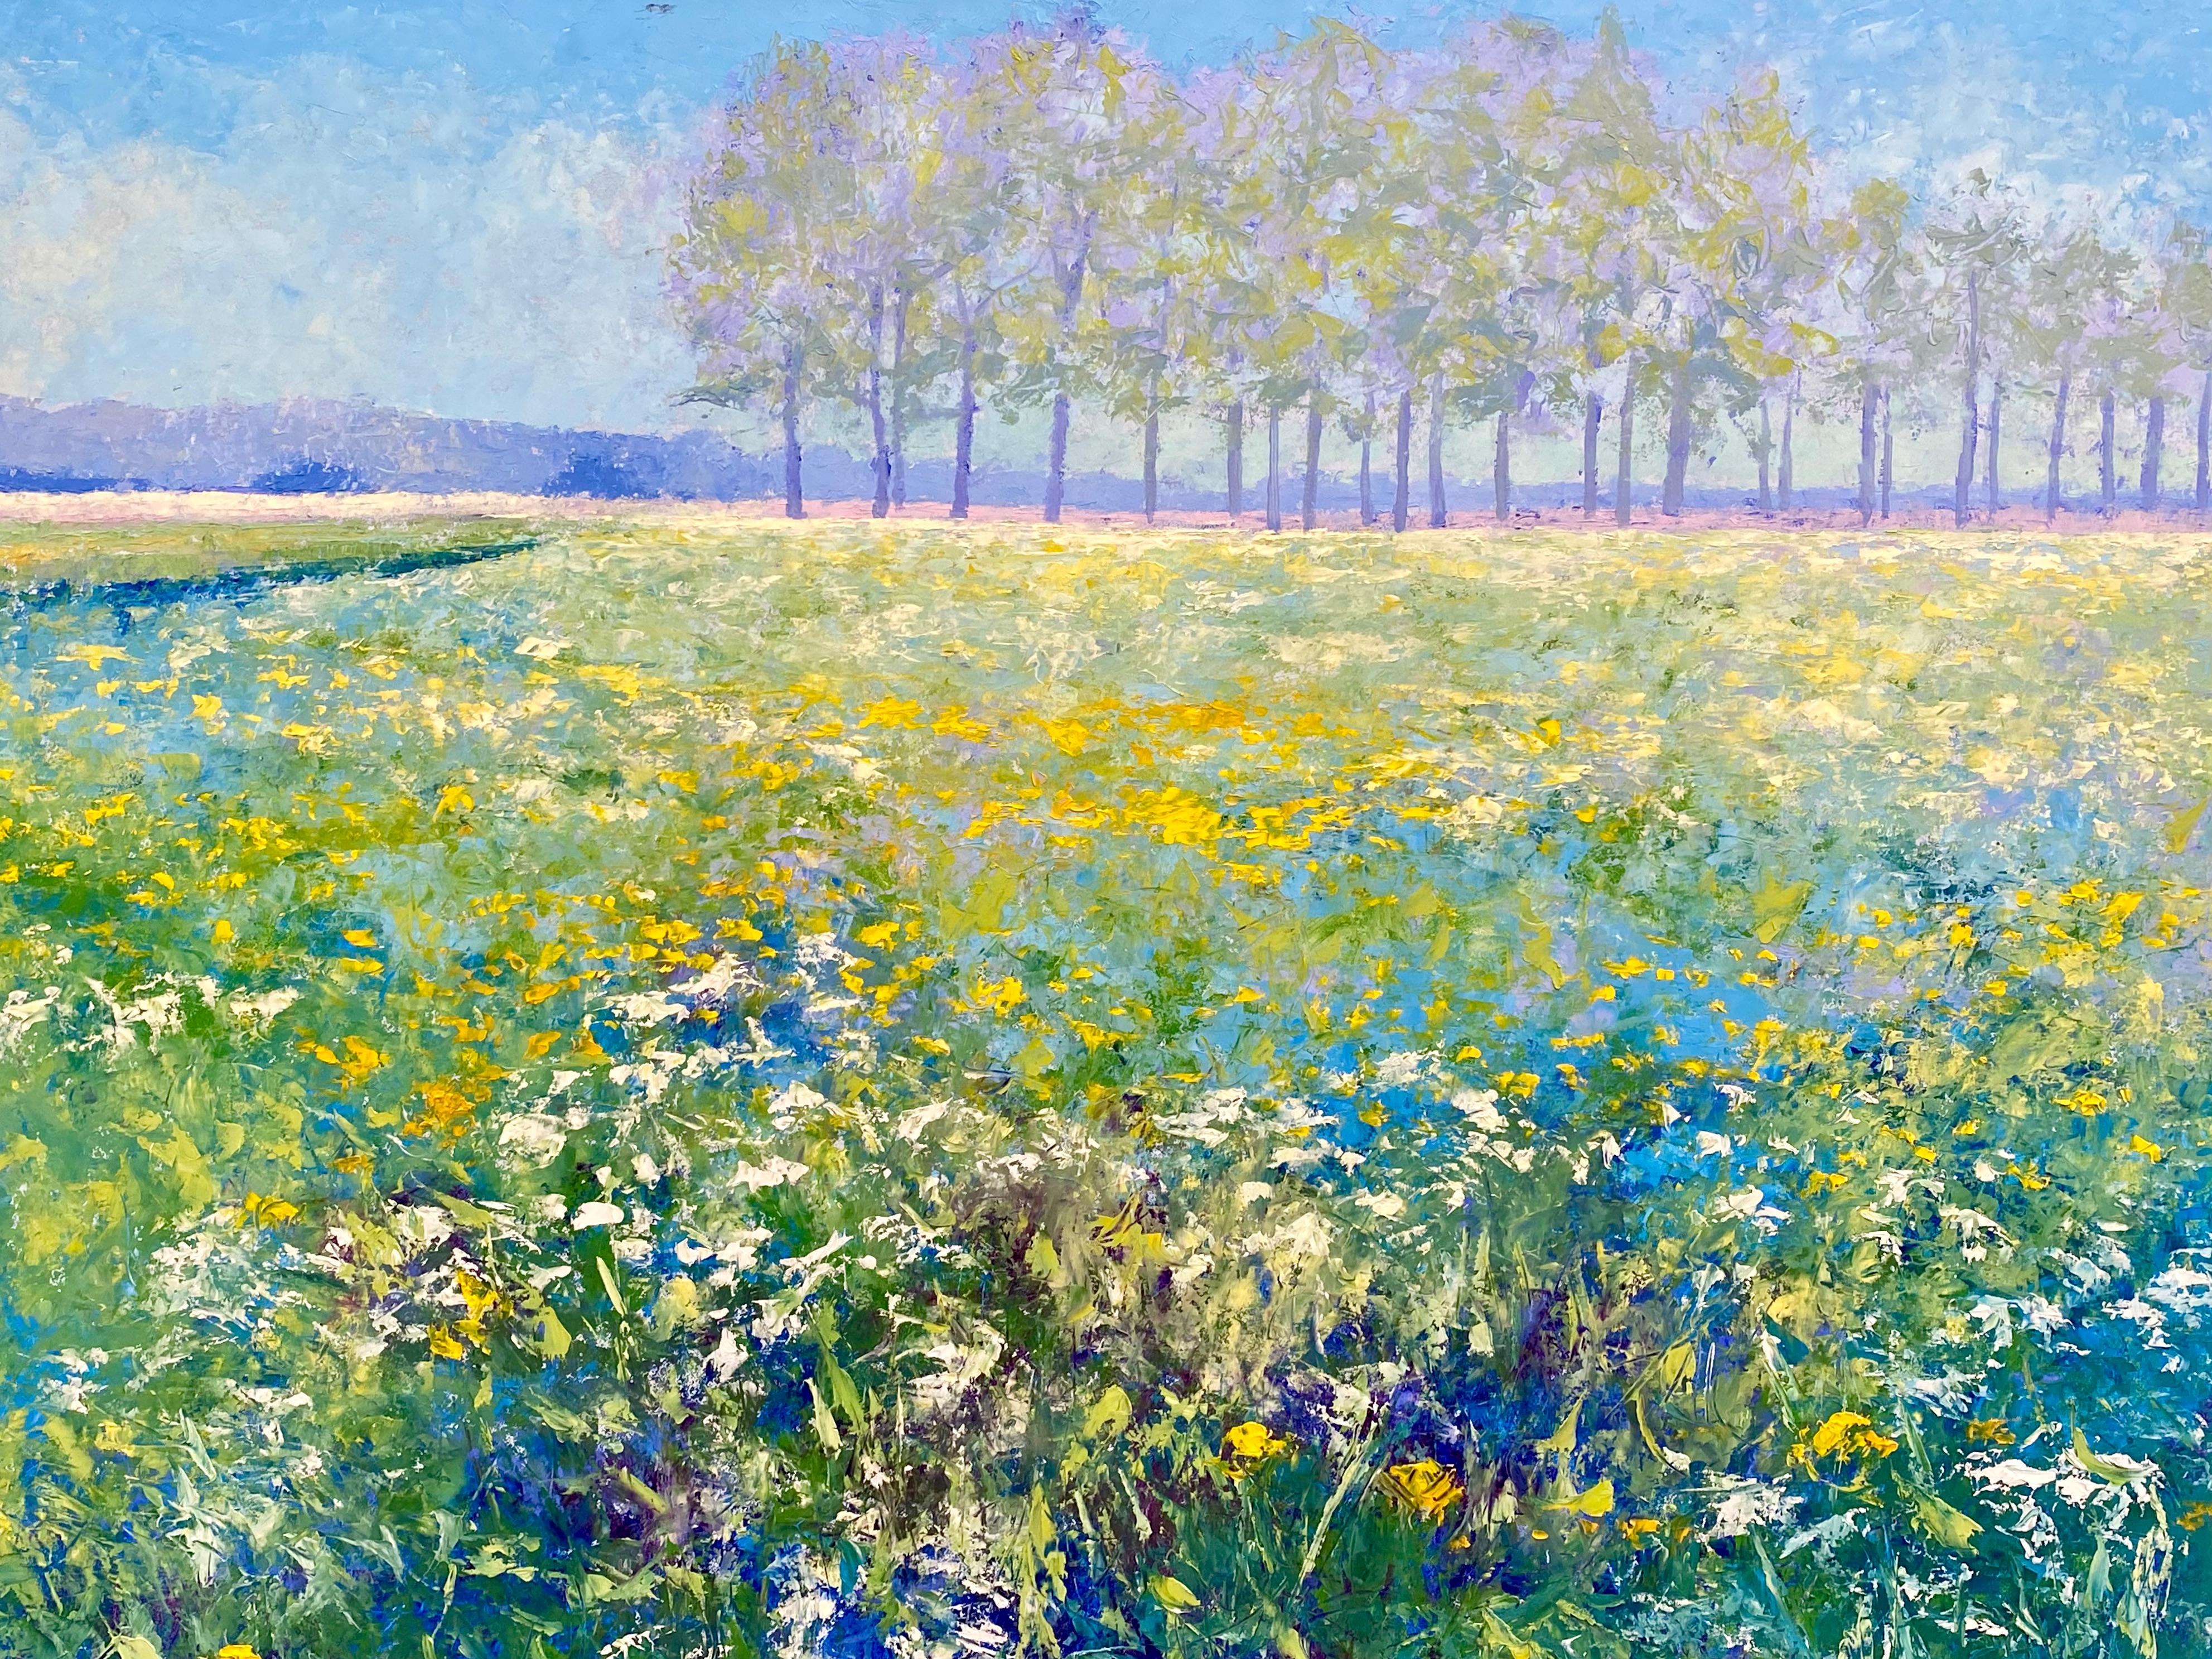 The Fields- 21st Century Contemporary Impressionistic Dutch Landscape Painting - Blue Figurative Painting by Ronald Soeliman